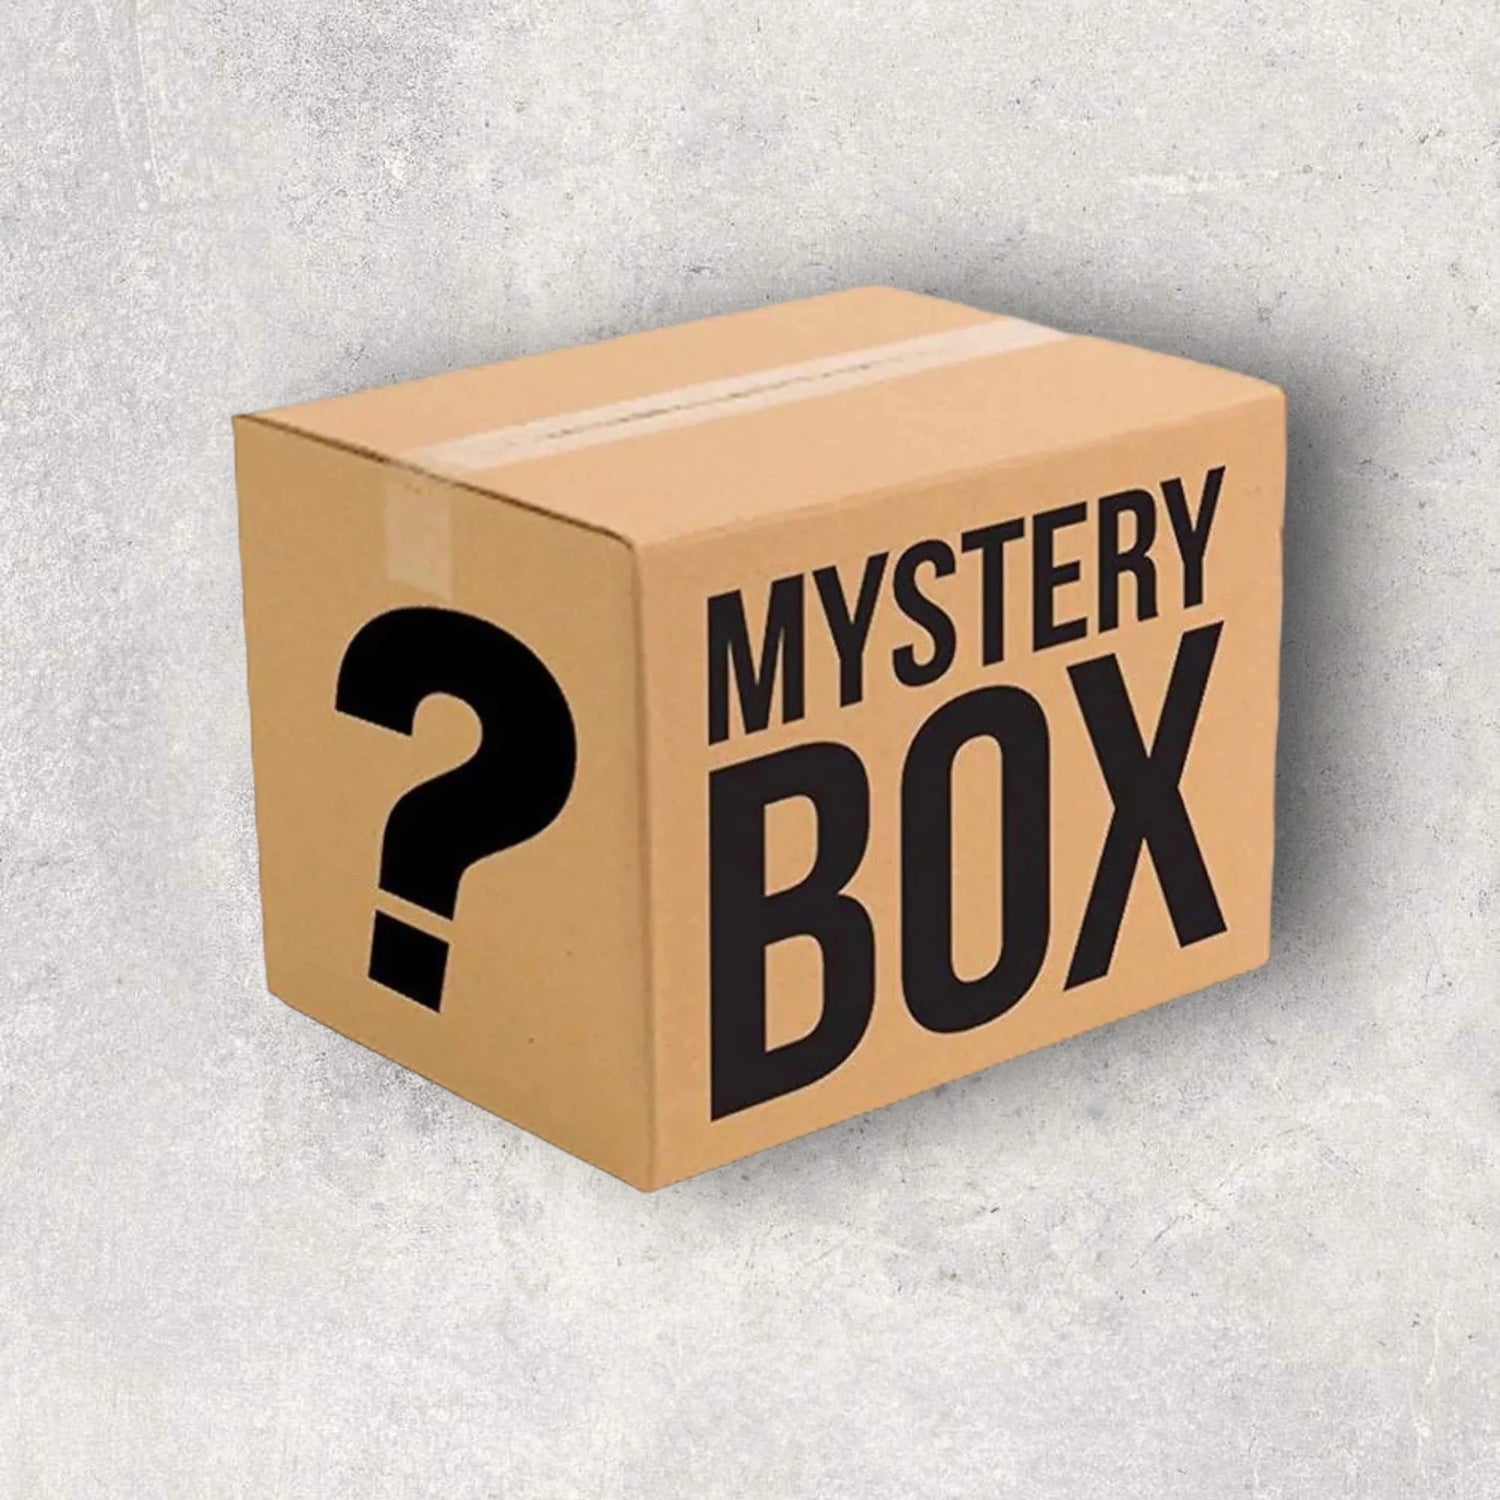 ALL MYSTERY BOXES